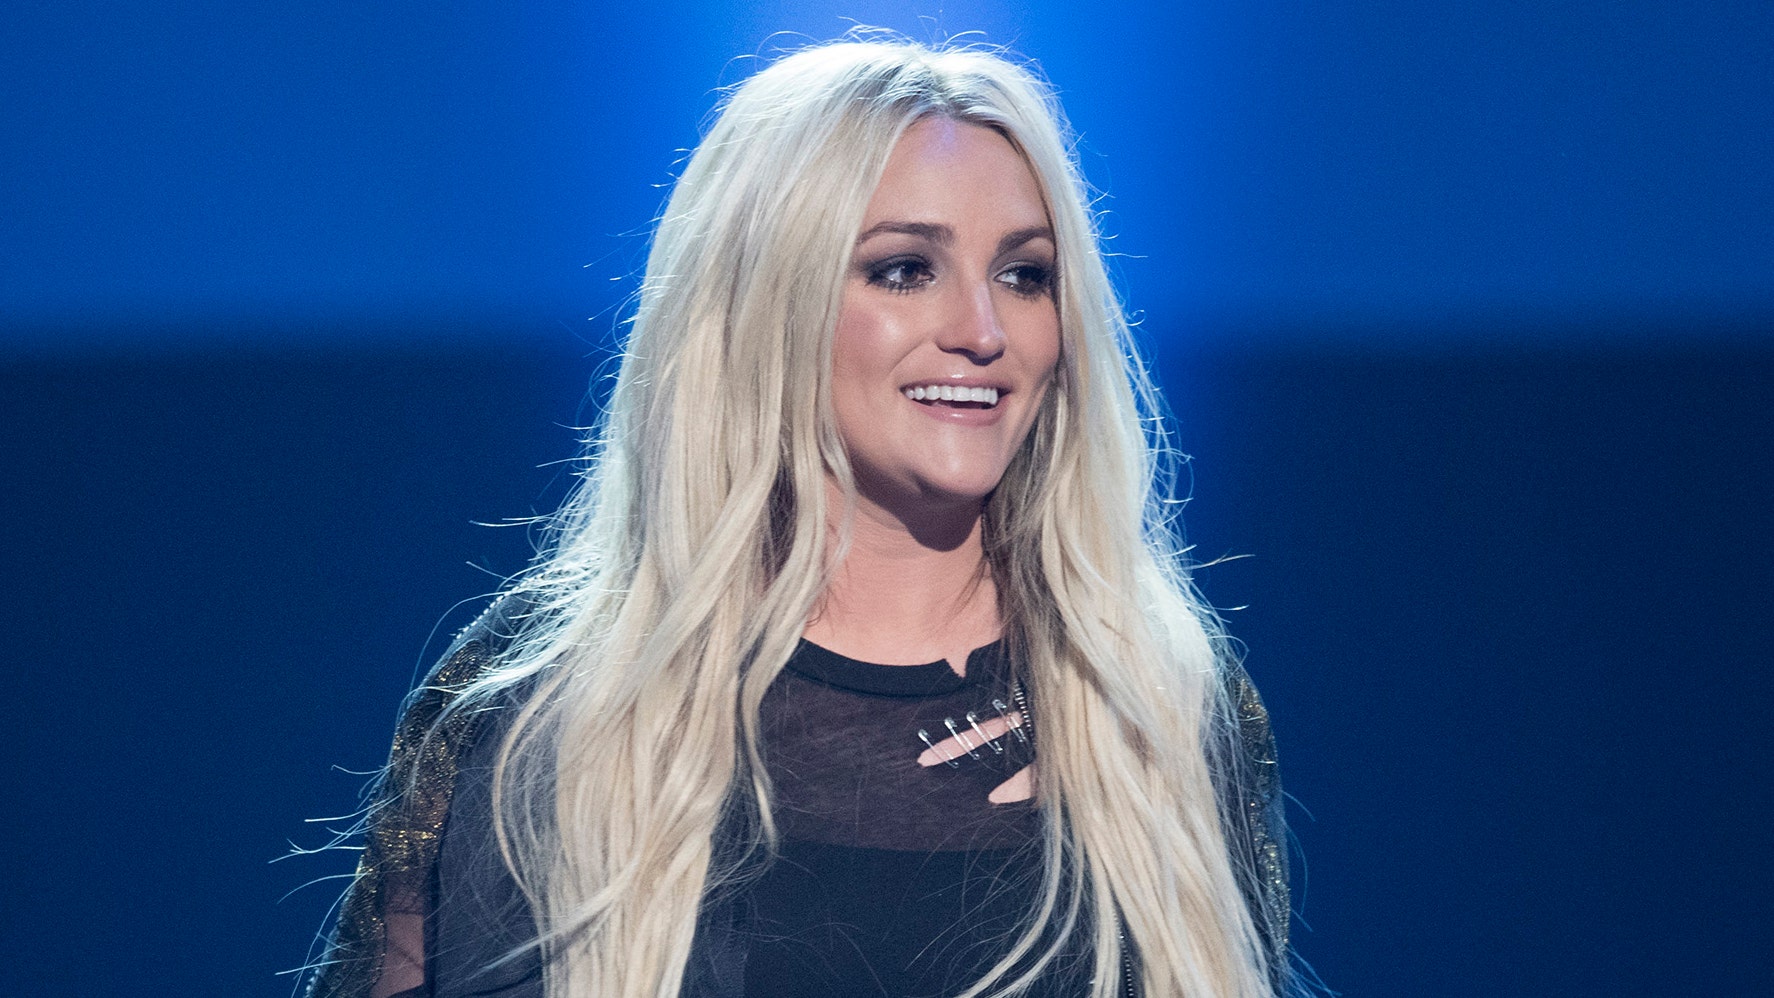 Jamie Lynn Spears releases updated version of 'Zoey 101' theme song